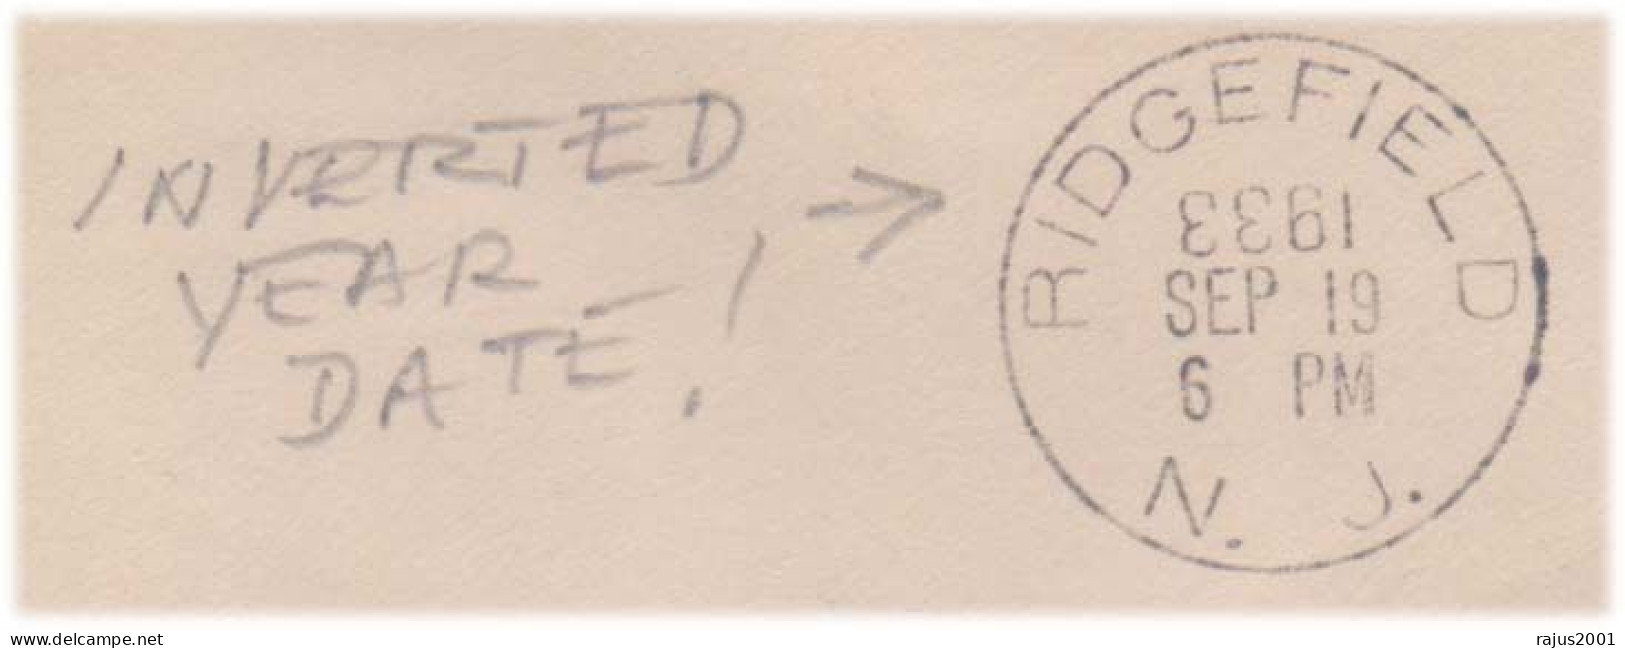 Battle Of Chickamauga Civil War Southern Victory, INVERTED ERROR YEAR DATE POSTMARK Cover SPONSORED BY LLOYD R. OSTNER - Errors, Freaks & Oddities (EFOs)